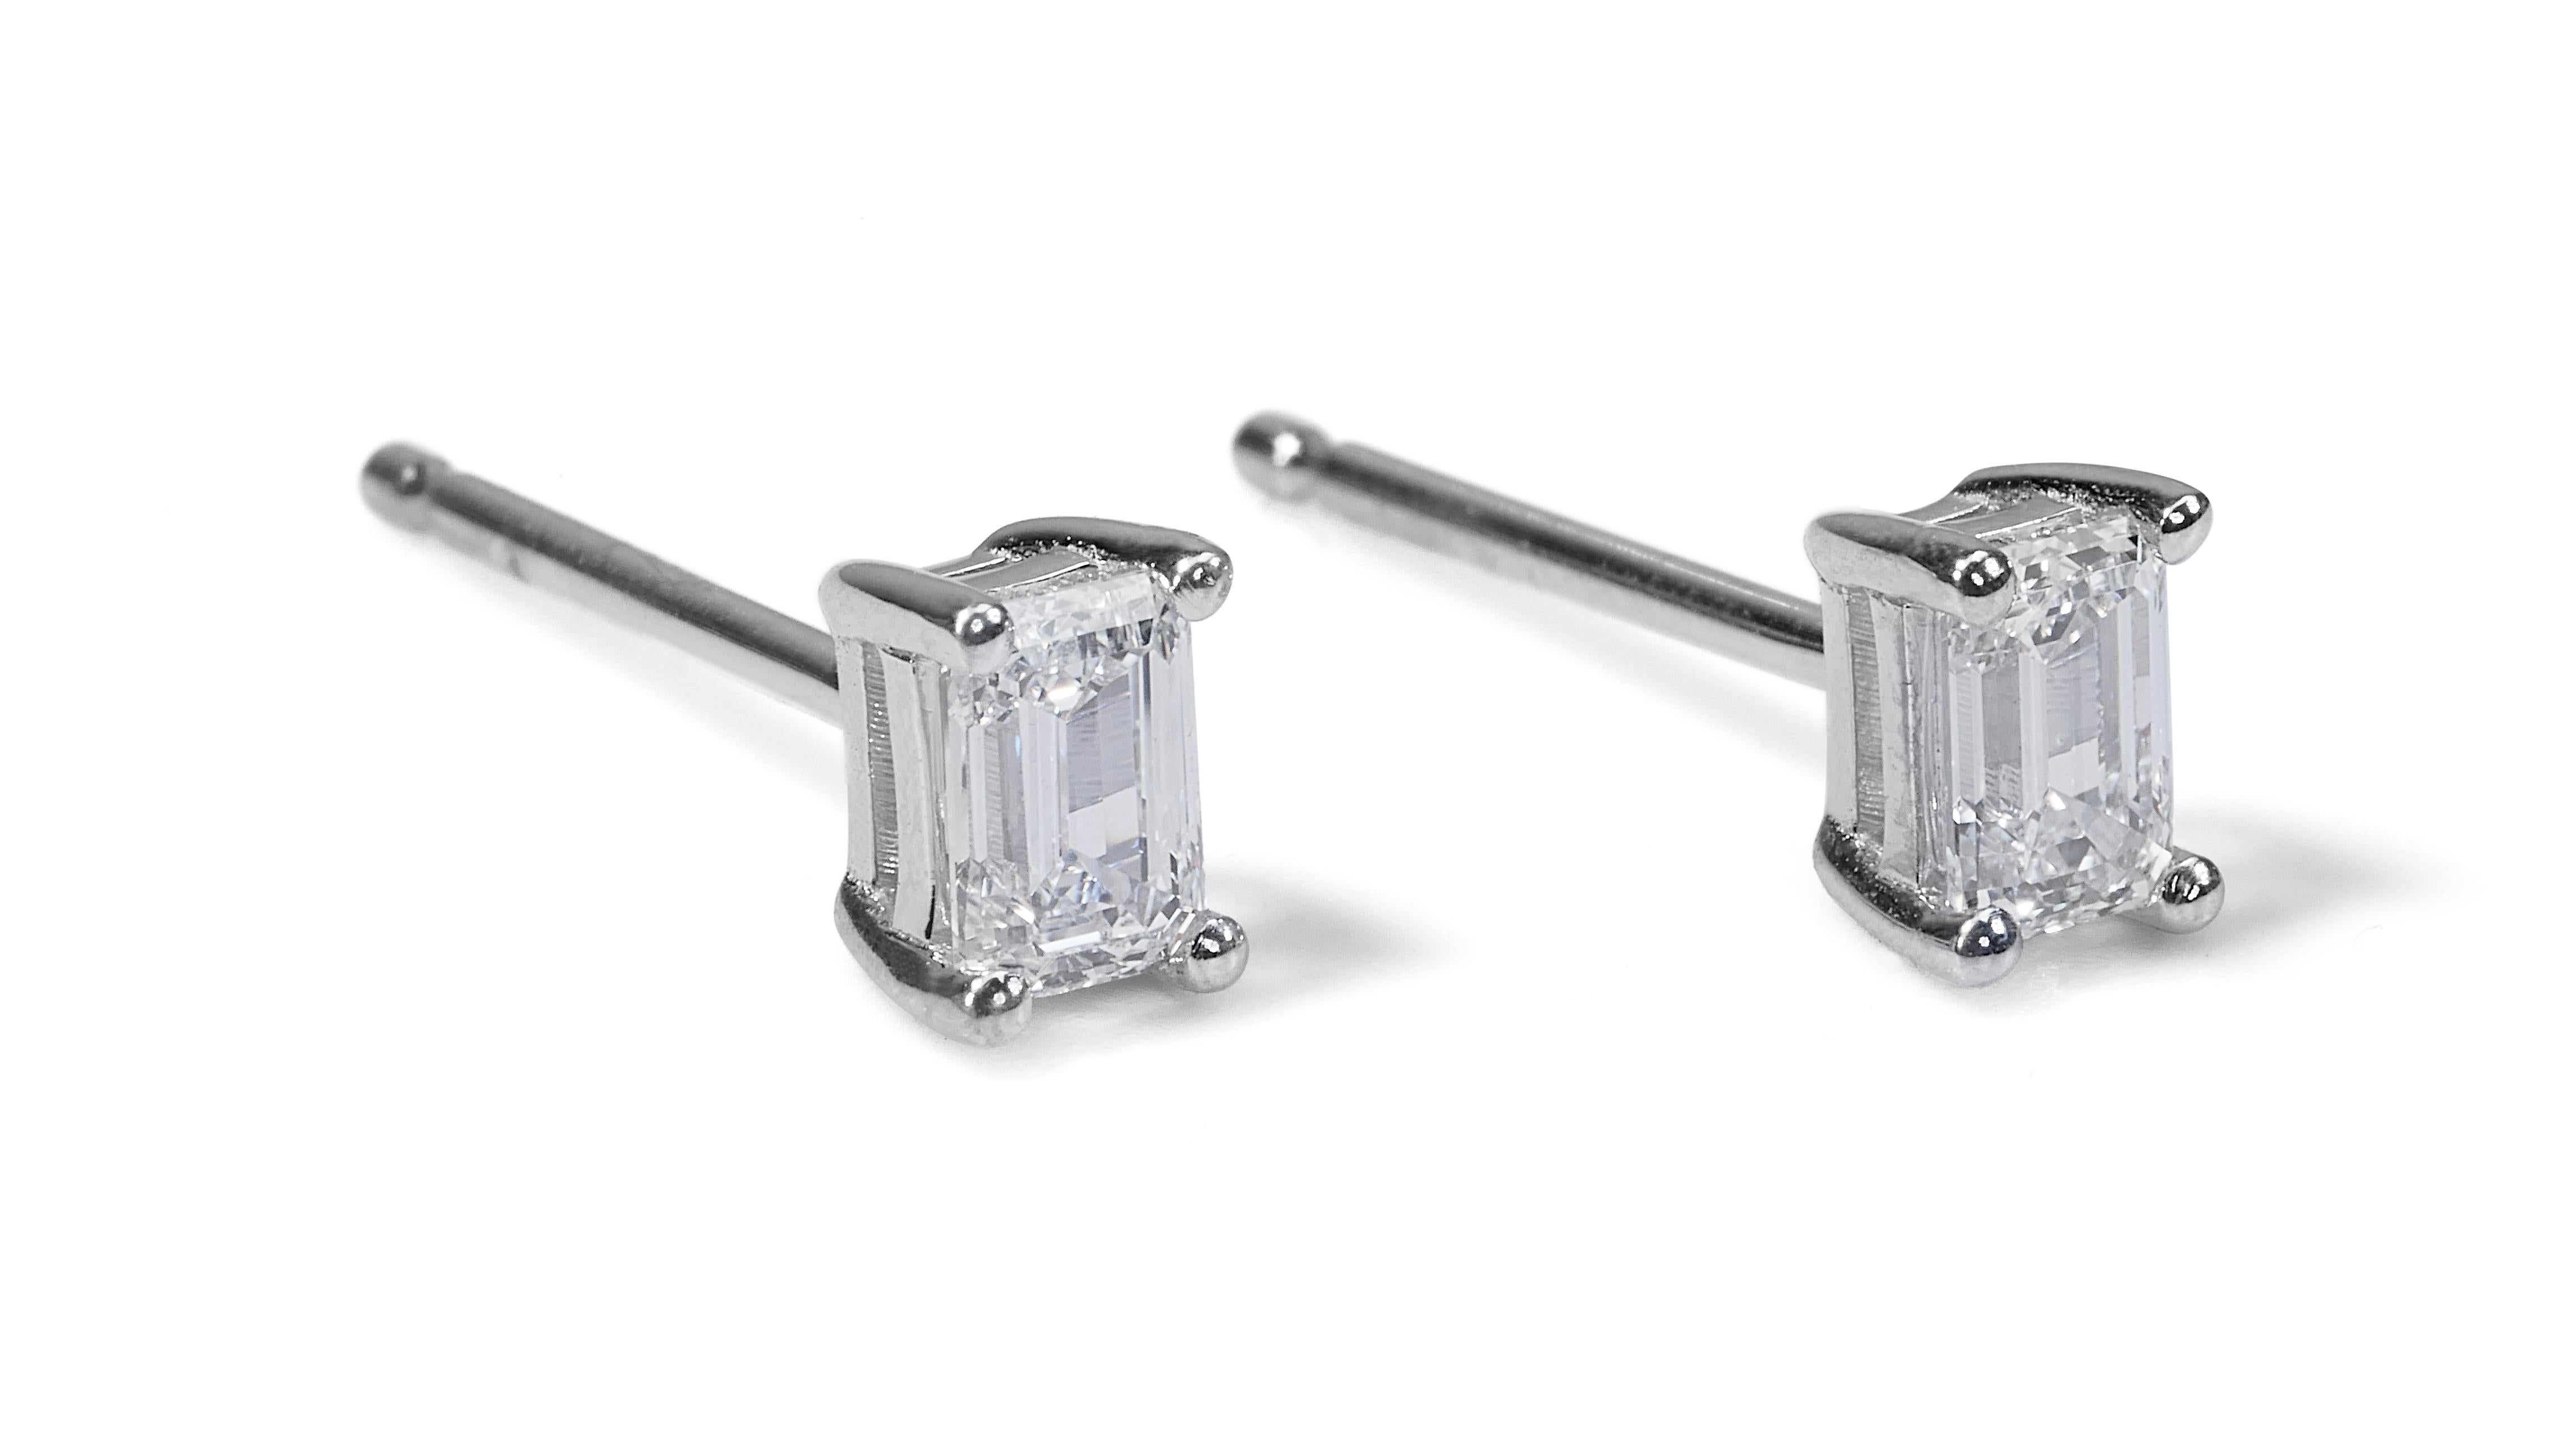 Emerald Cut Timeless 2.02ct Diamond Stud Earrings in 18k White Gold - GIA Certified For Sale